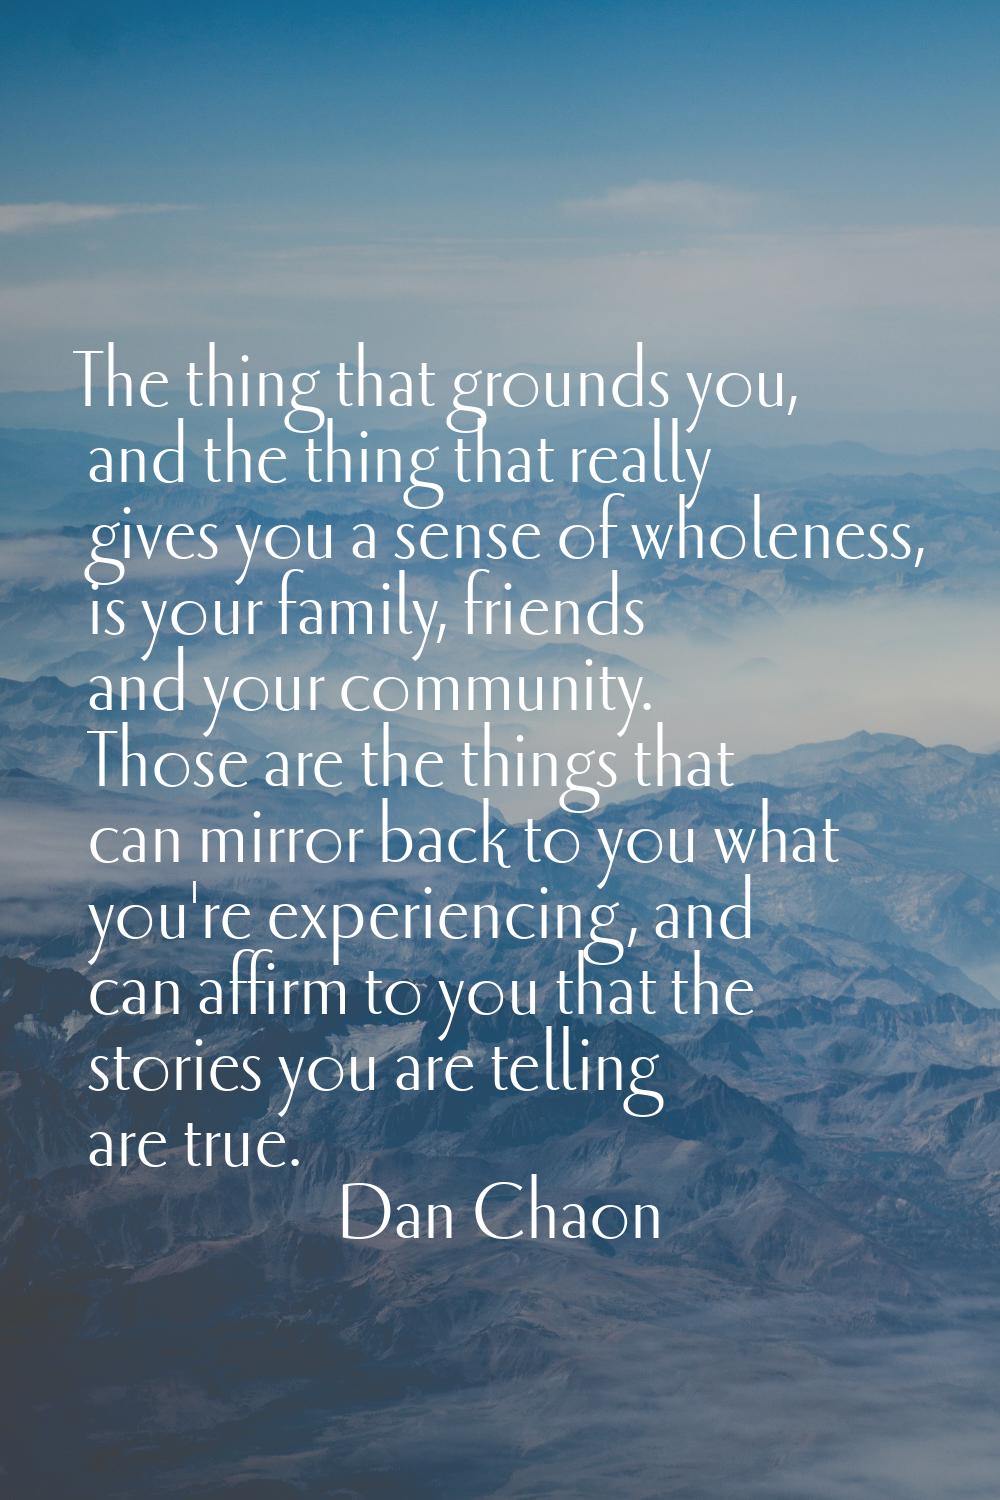 The thing that grounds you, and the thing that really gives you a sense of wholeness, is your famil